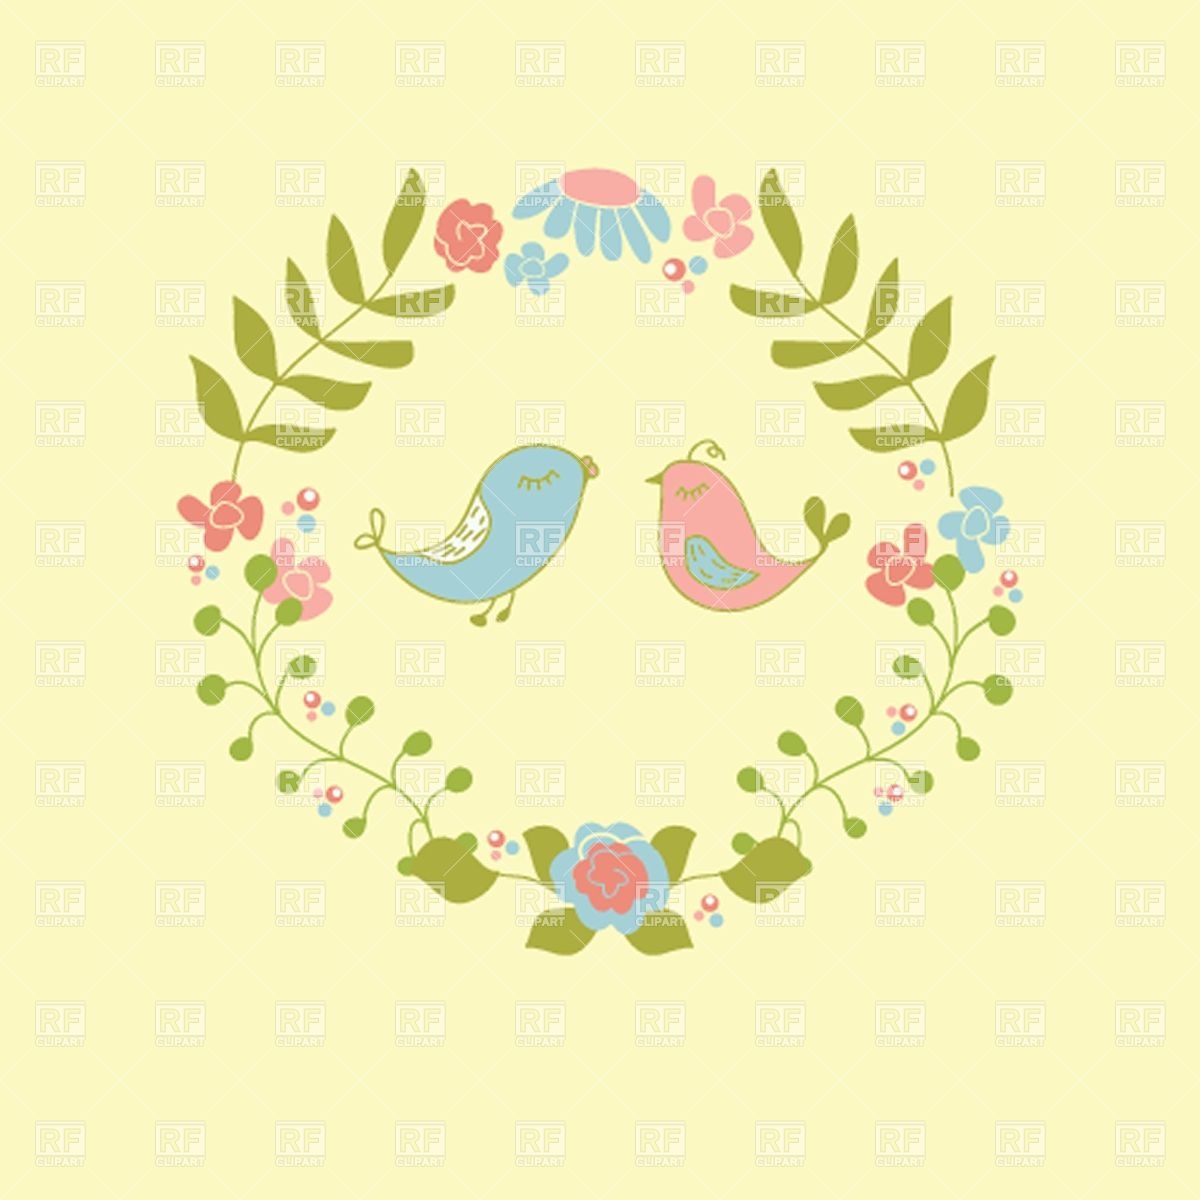 Wedding Invitation Or Greeting Card With Cute Floral Wreath And Birds